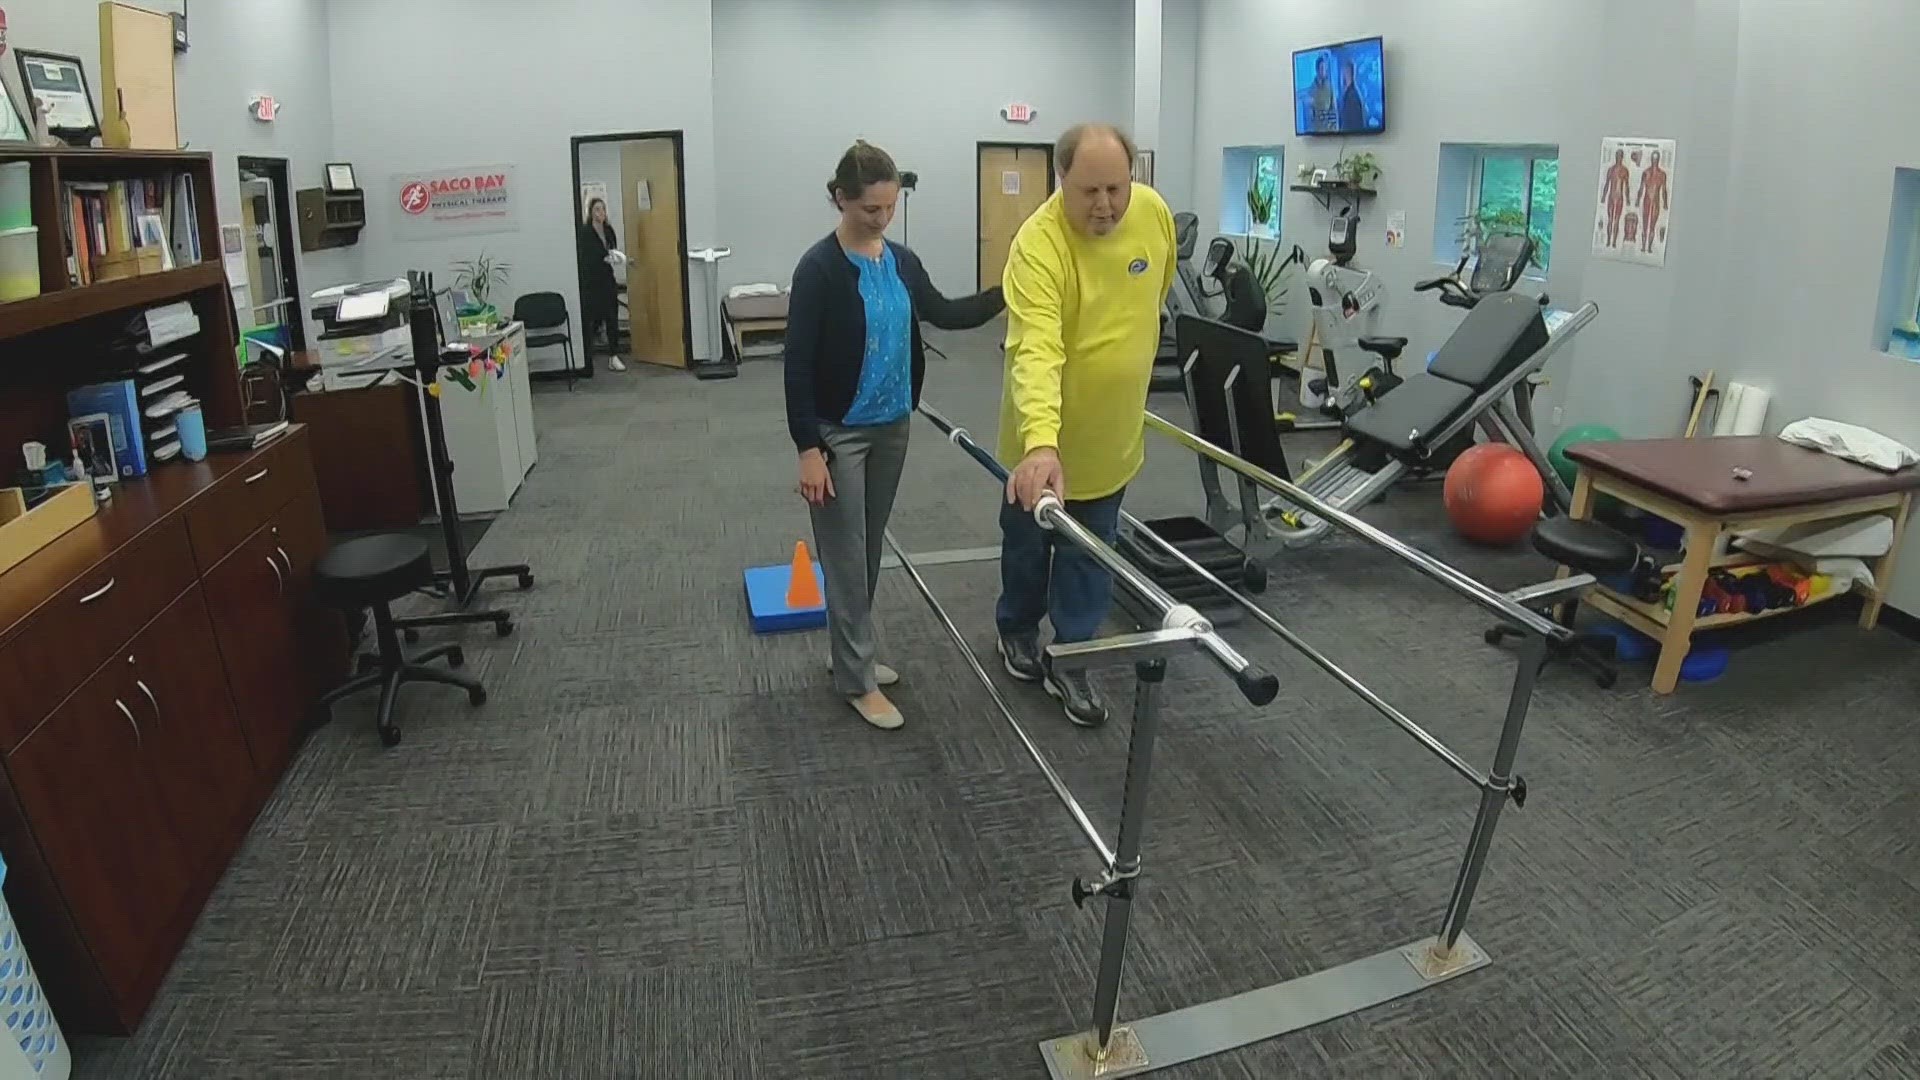 Revital Cancer Rehabilitation Program is helping patients overcome the side effects of treatment.